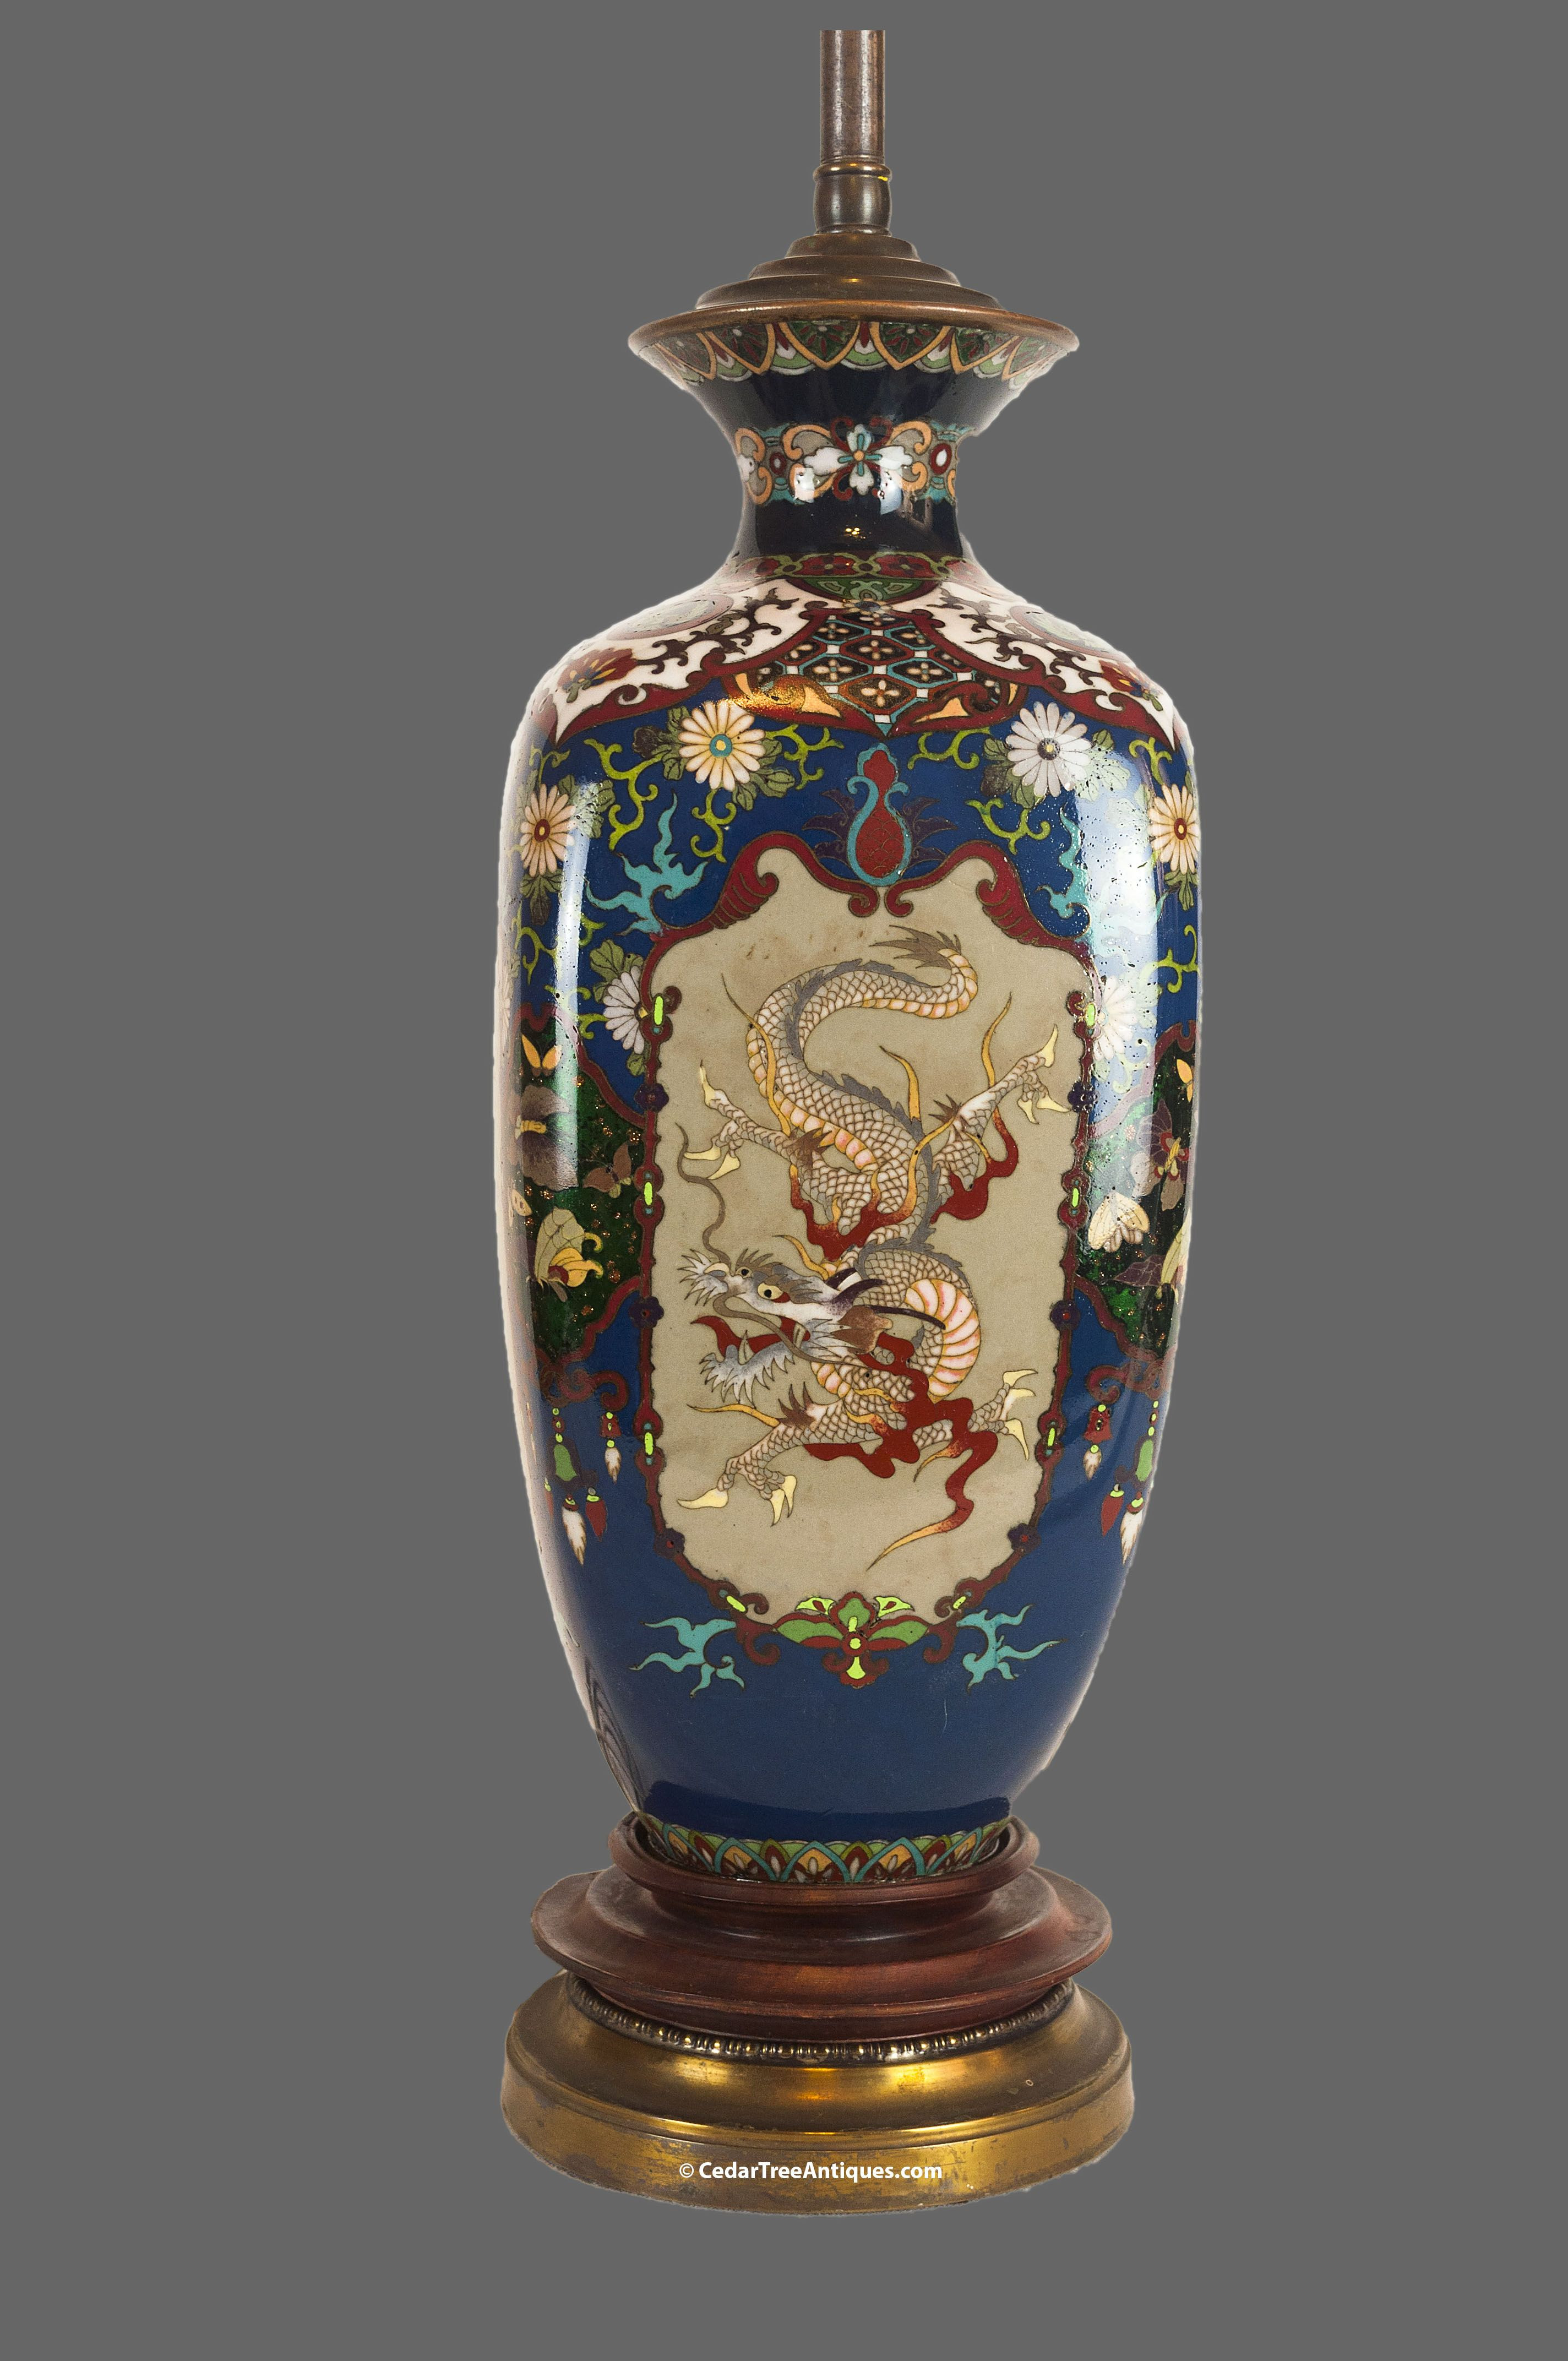 chinese vase lamp of large japanese meiji period cloisonne vase with multi panel multi regarding large japanese meiji period cloisonne vase with multi panel multi color dragon and phoenix motifs mounted as a lamp